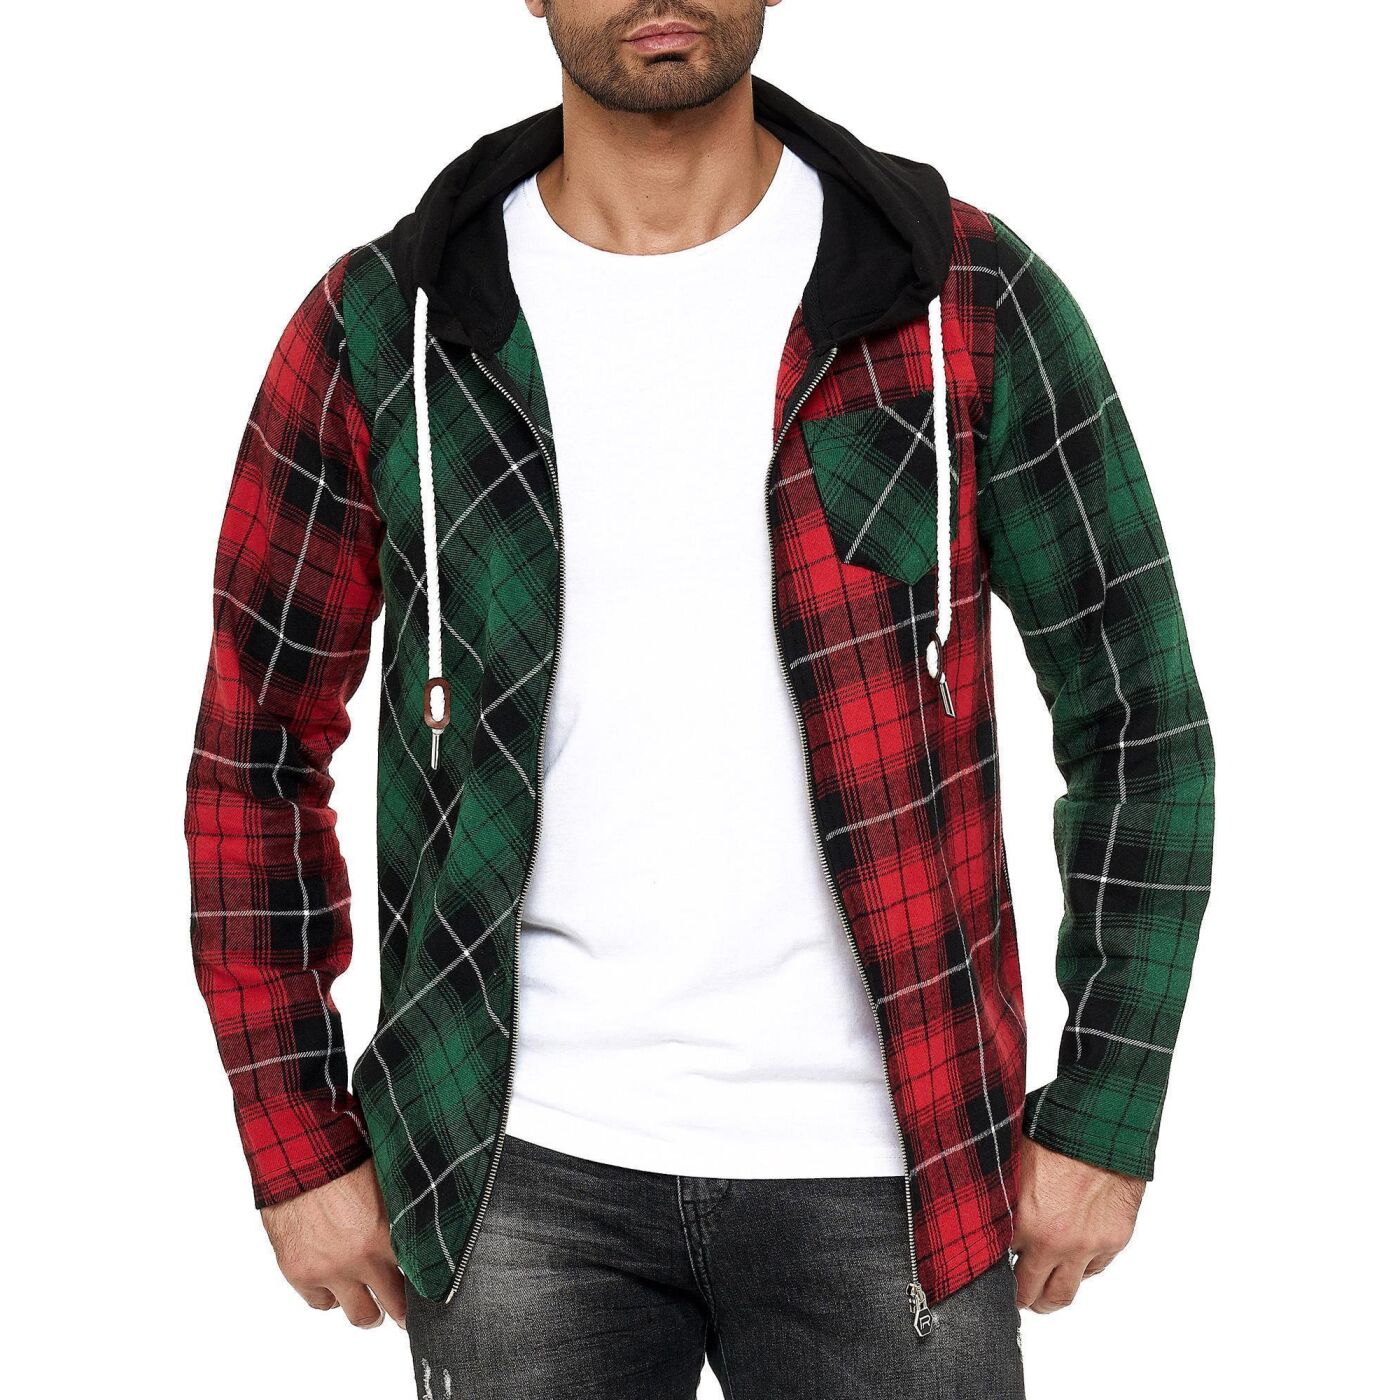 44,90 Jacket mens with € hooded Pullover Sweat Bridge Red checkere, Sweatshirt